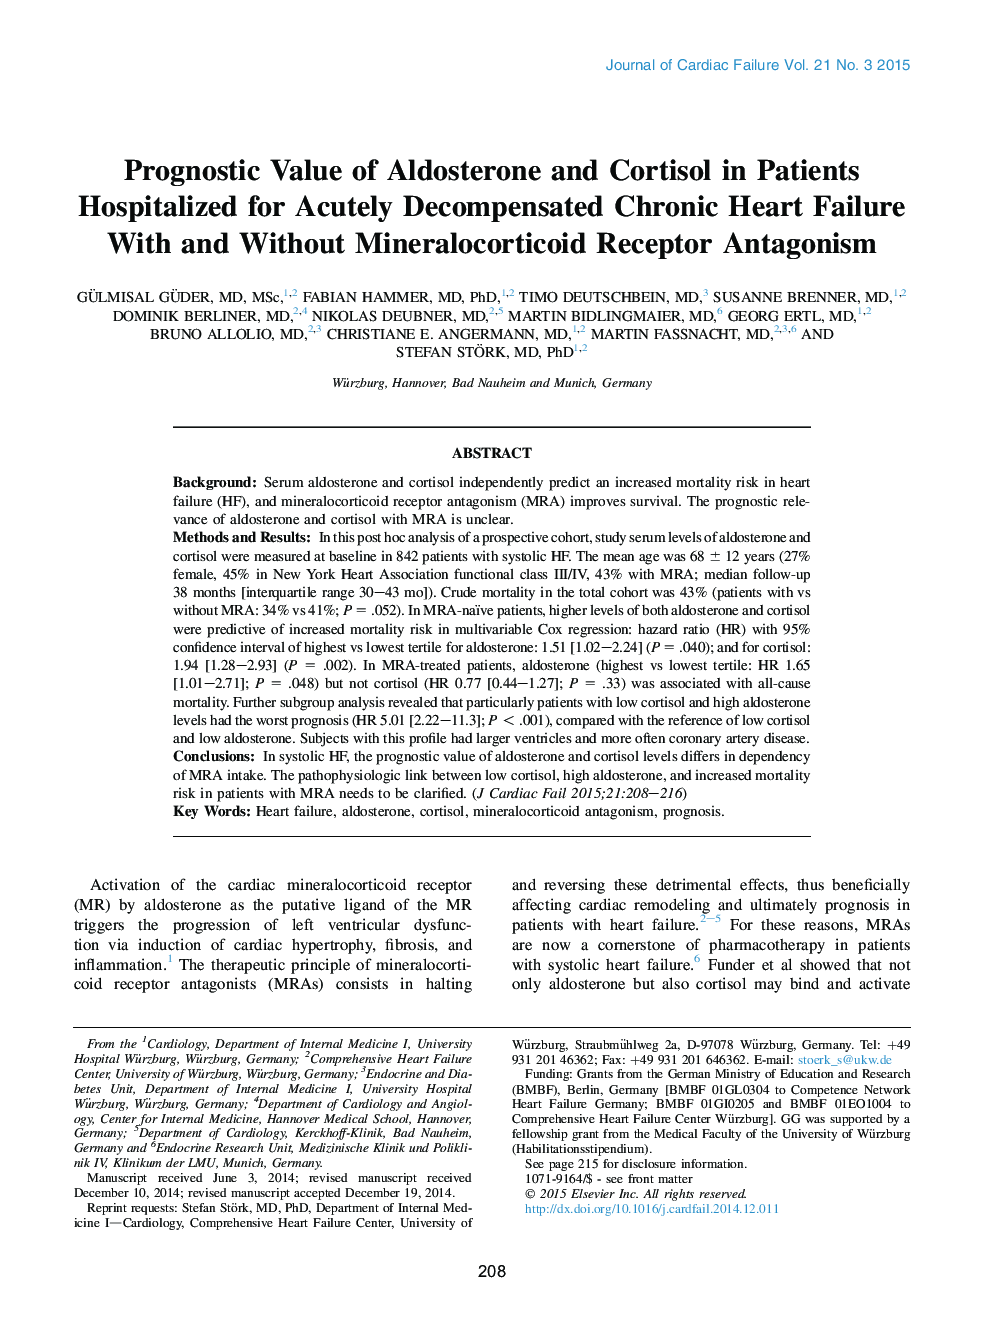 Prognostic Value of Aldosterone and Cortisol in Patients Hospitalized for Acutely Decompensated Chronic Heart Failure With and Without Mineralocorticoid Receptor Antagonism 